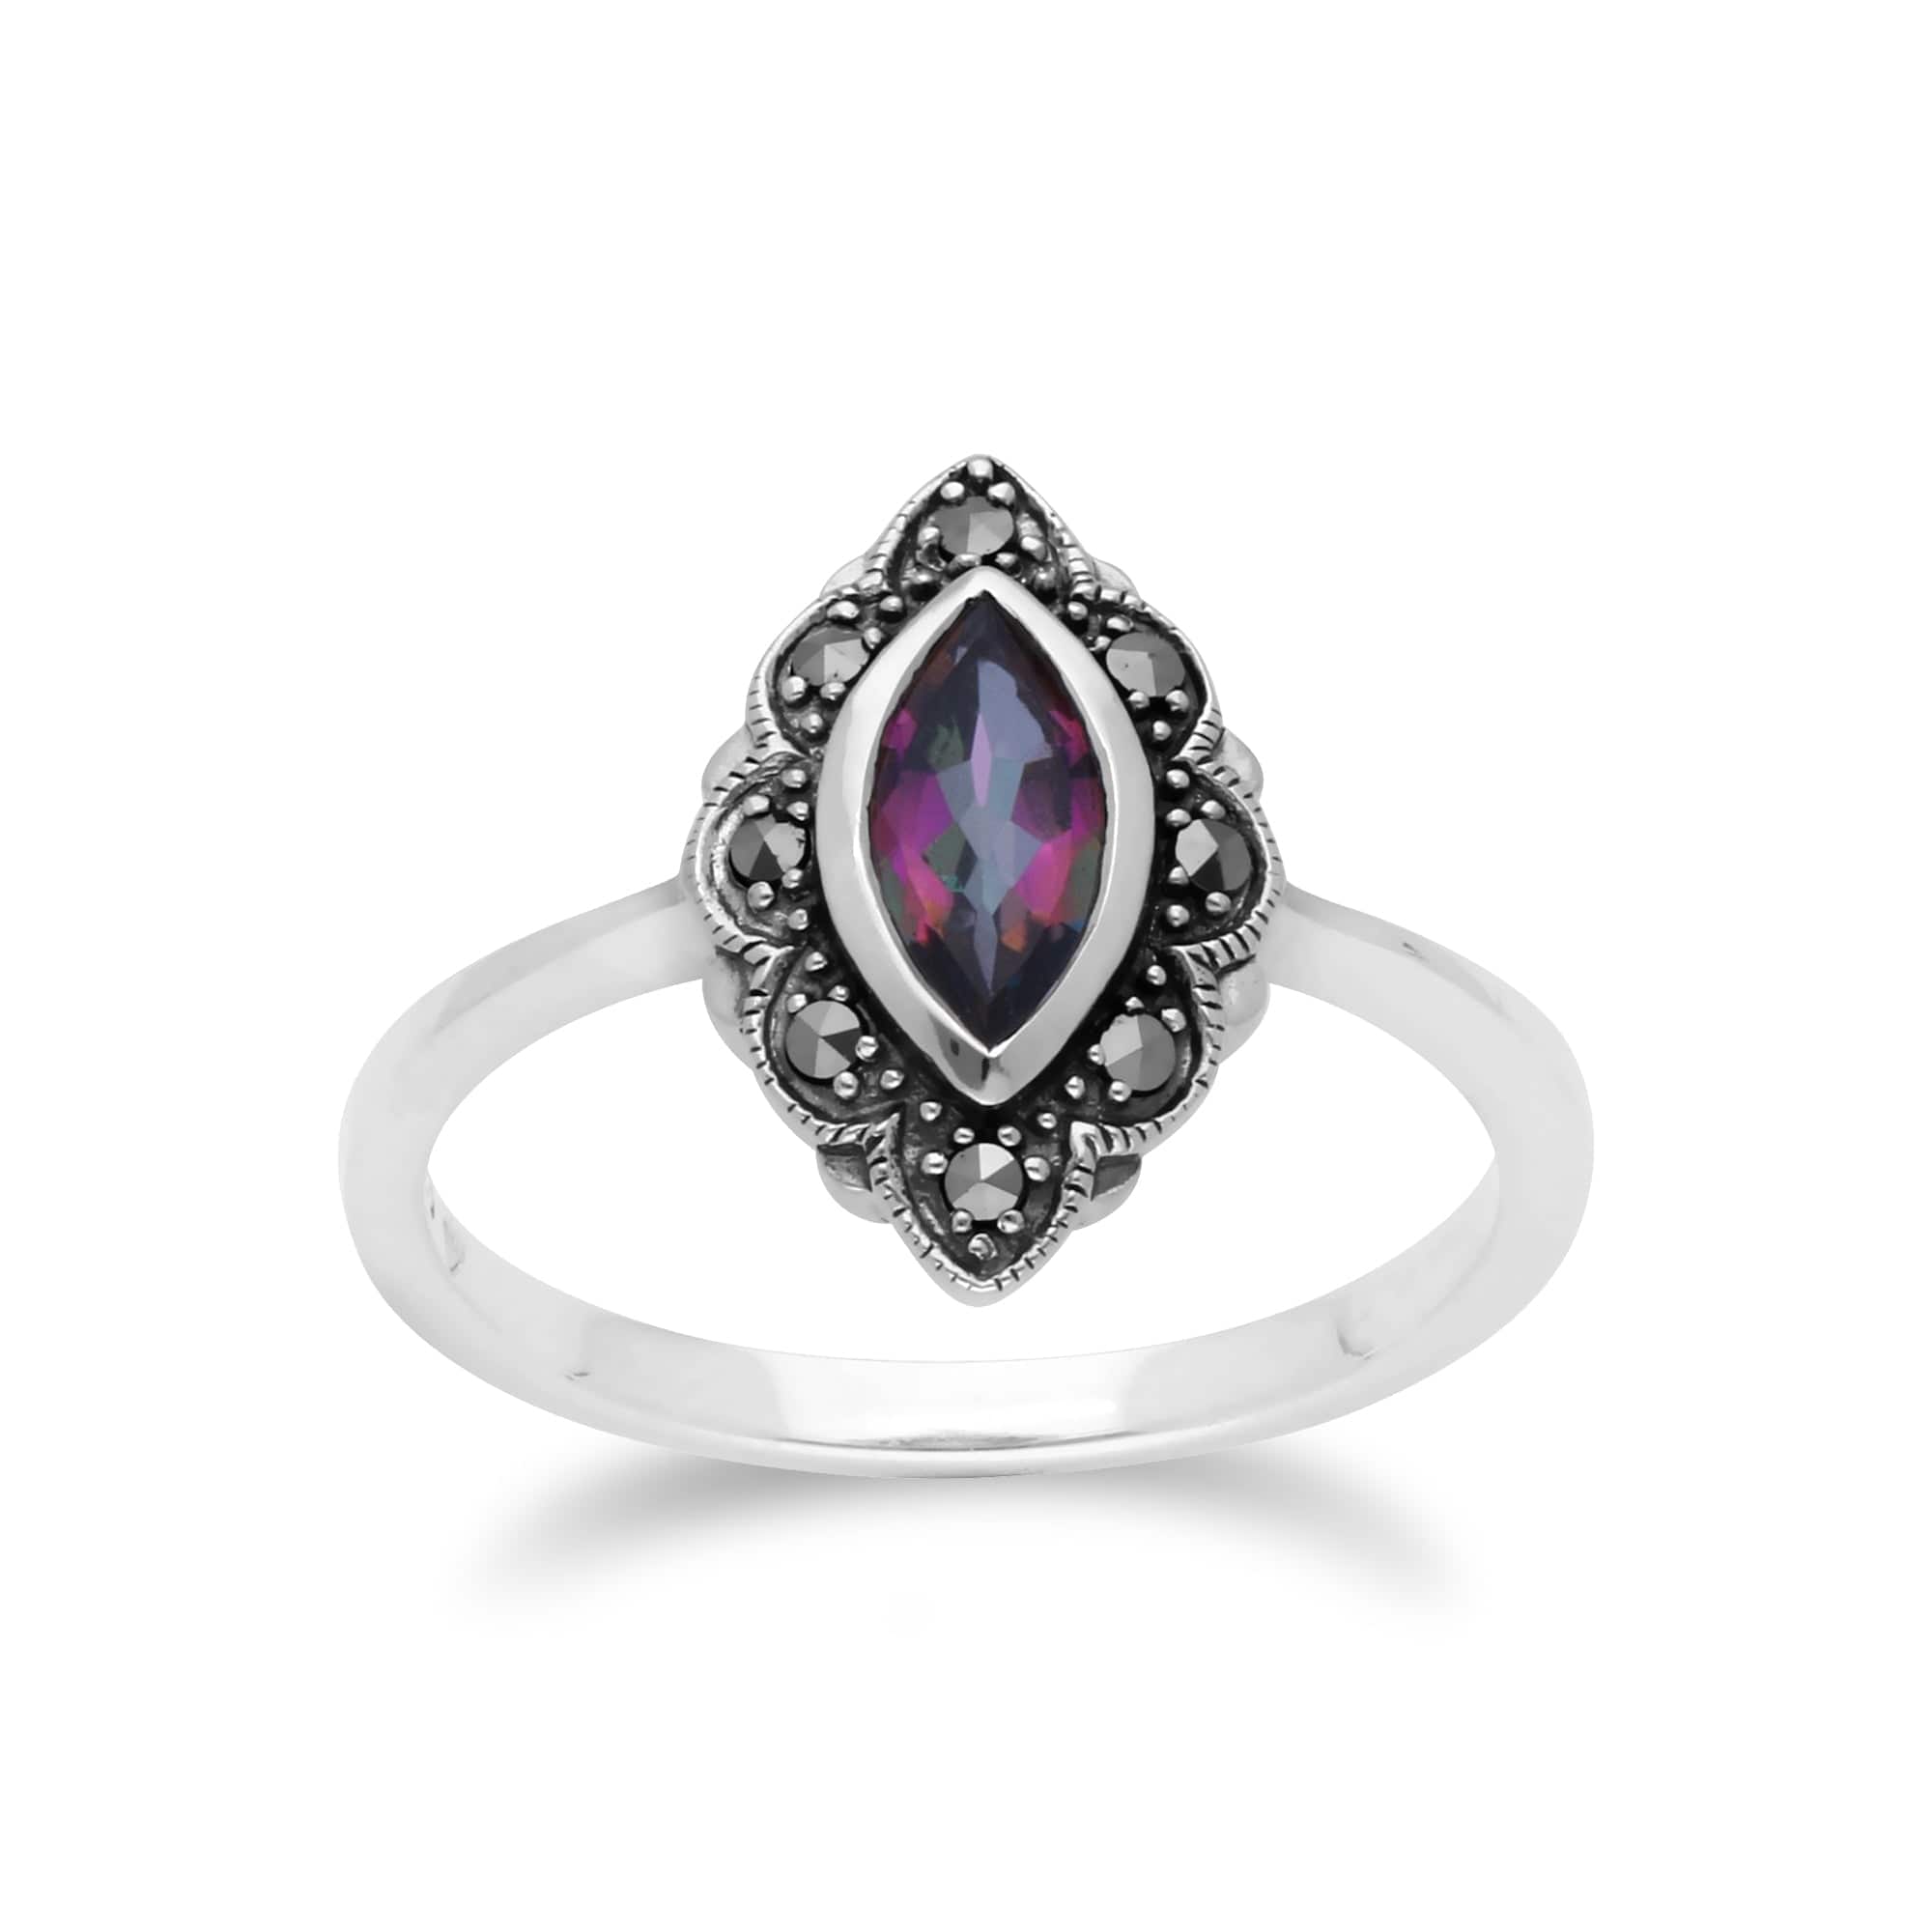 214R597204925 Art Nouveau Marquise Mystic Topaz & Marcasite Leaf Ring in 925 Sterling Silver 1